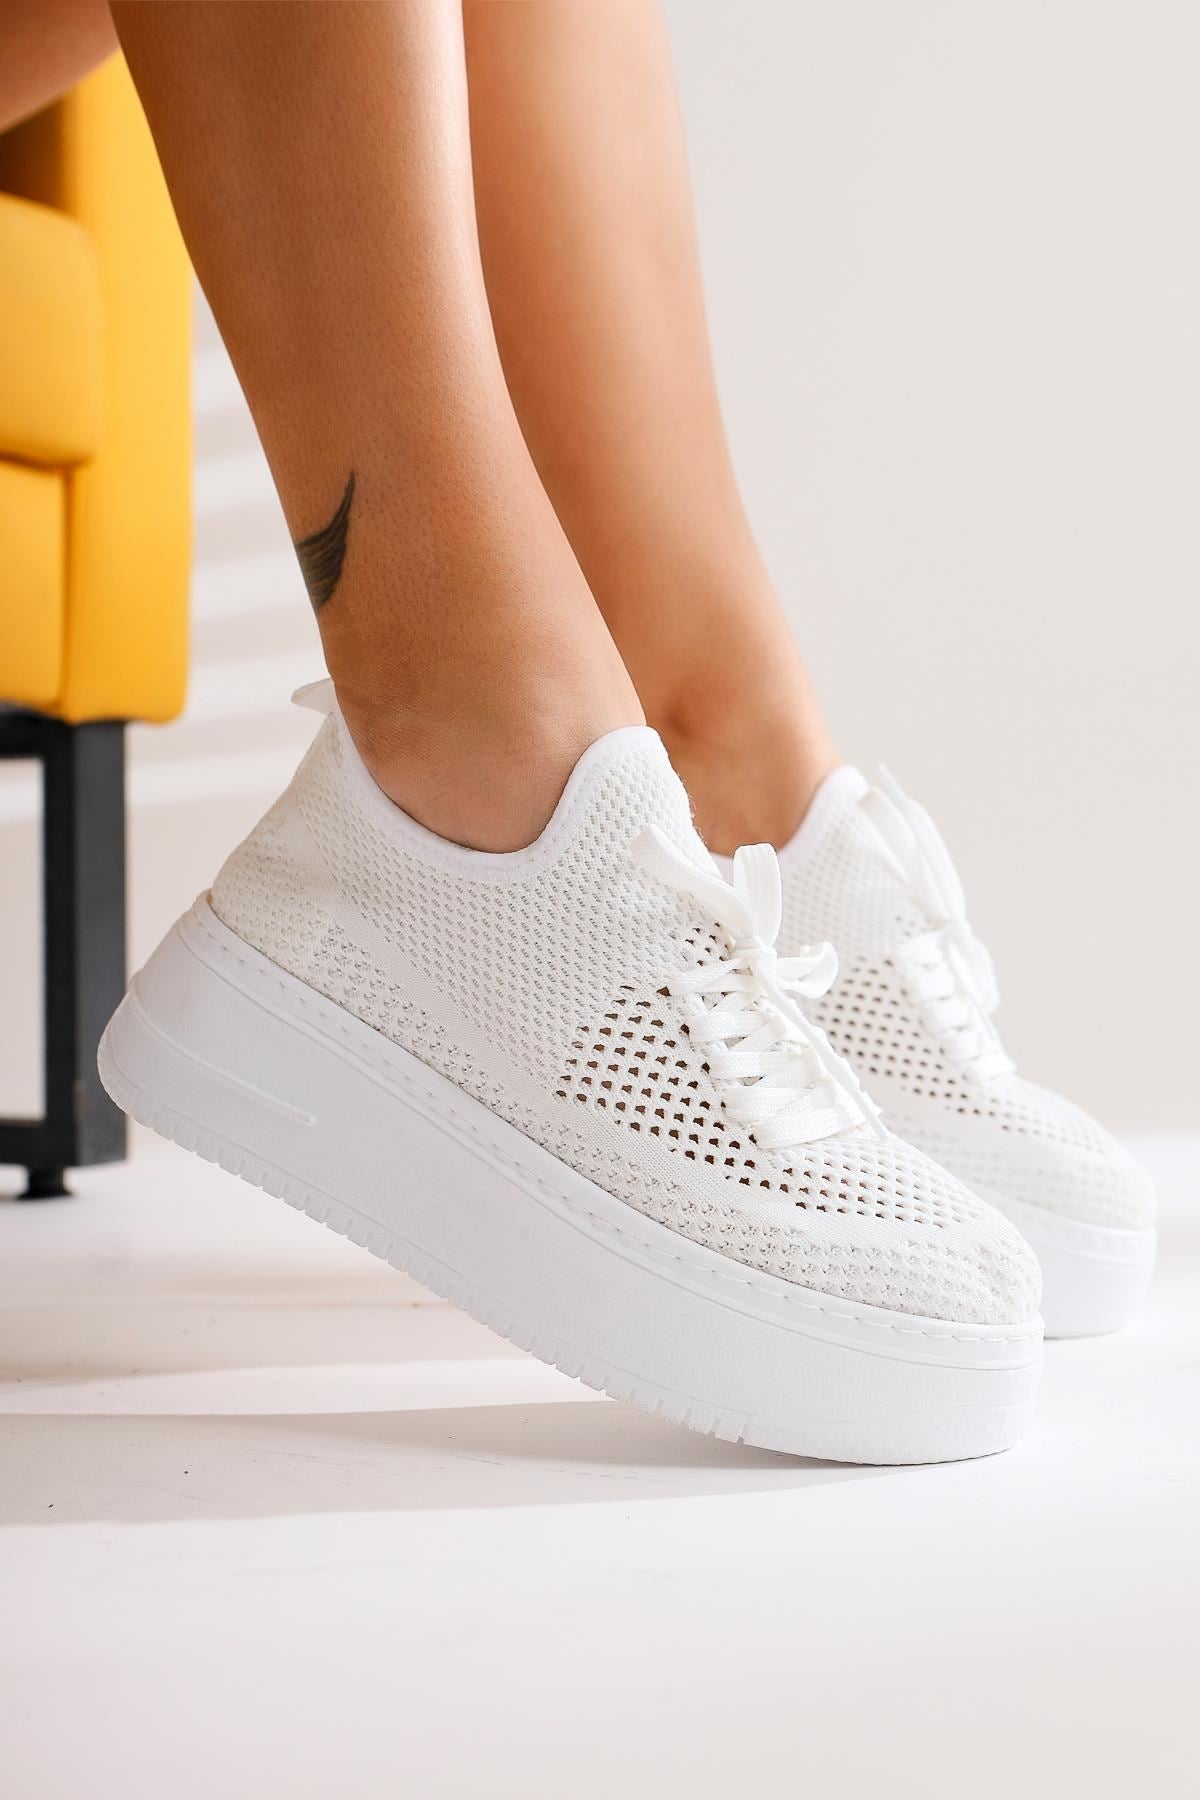 Women's White Knitwear Stretch Thick Soled Sports Shoes - STREETMODE™